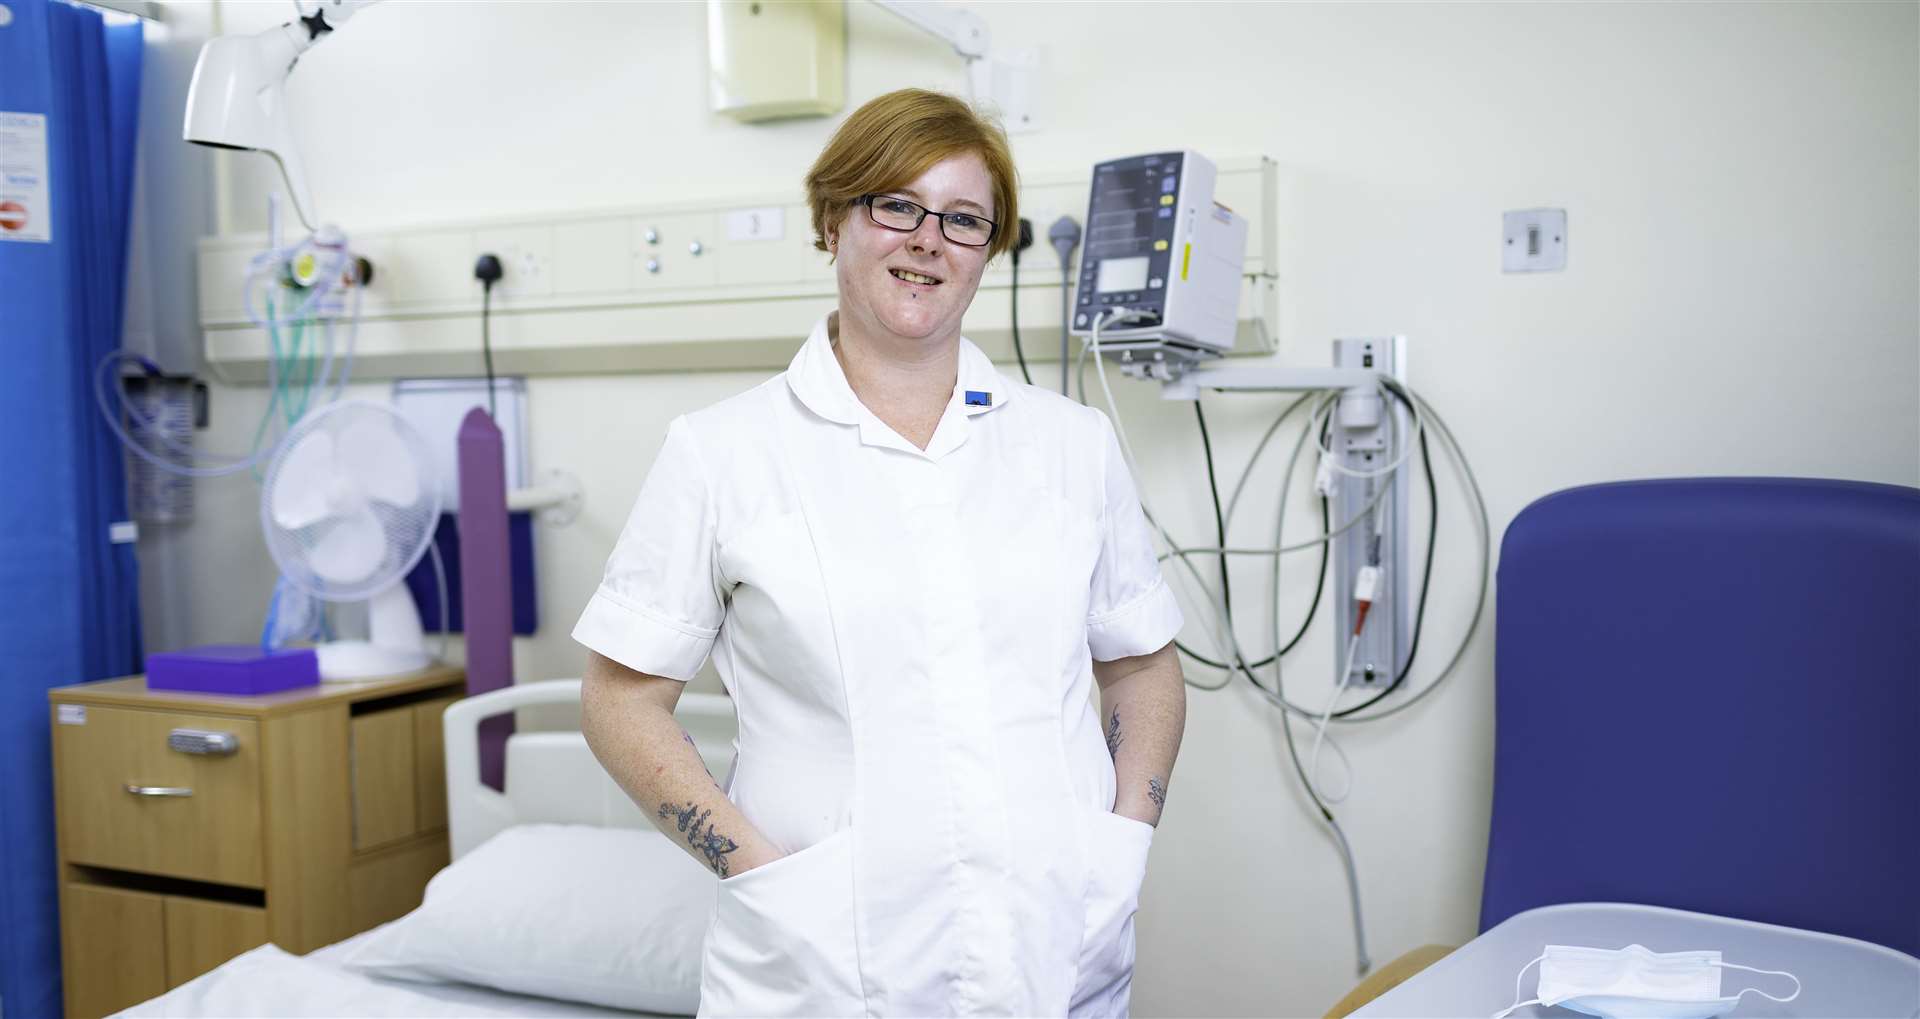 Mum-of-four Marie Muir always dreamed of becoming a qualified nurse but had no experience or the qualifications.